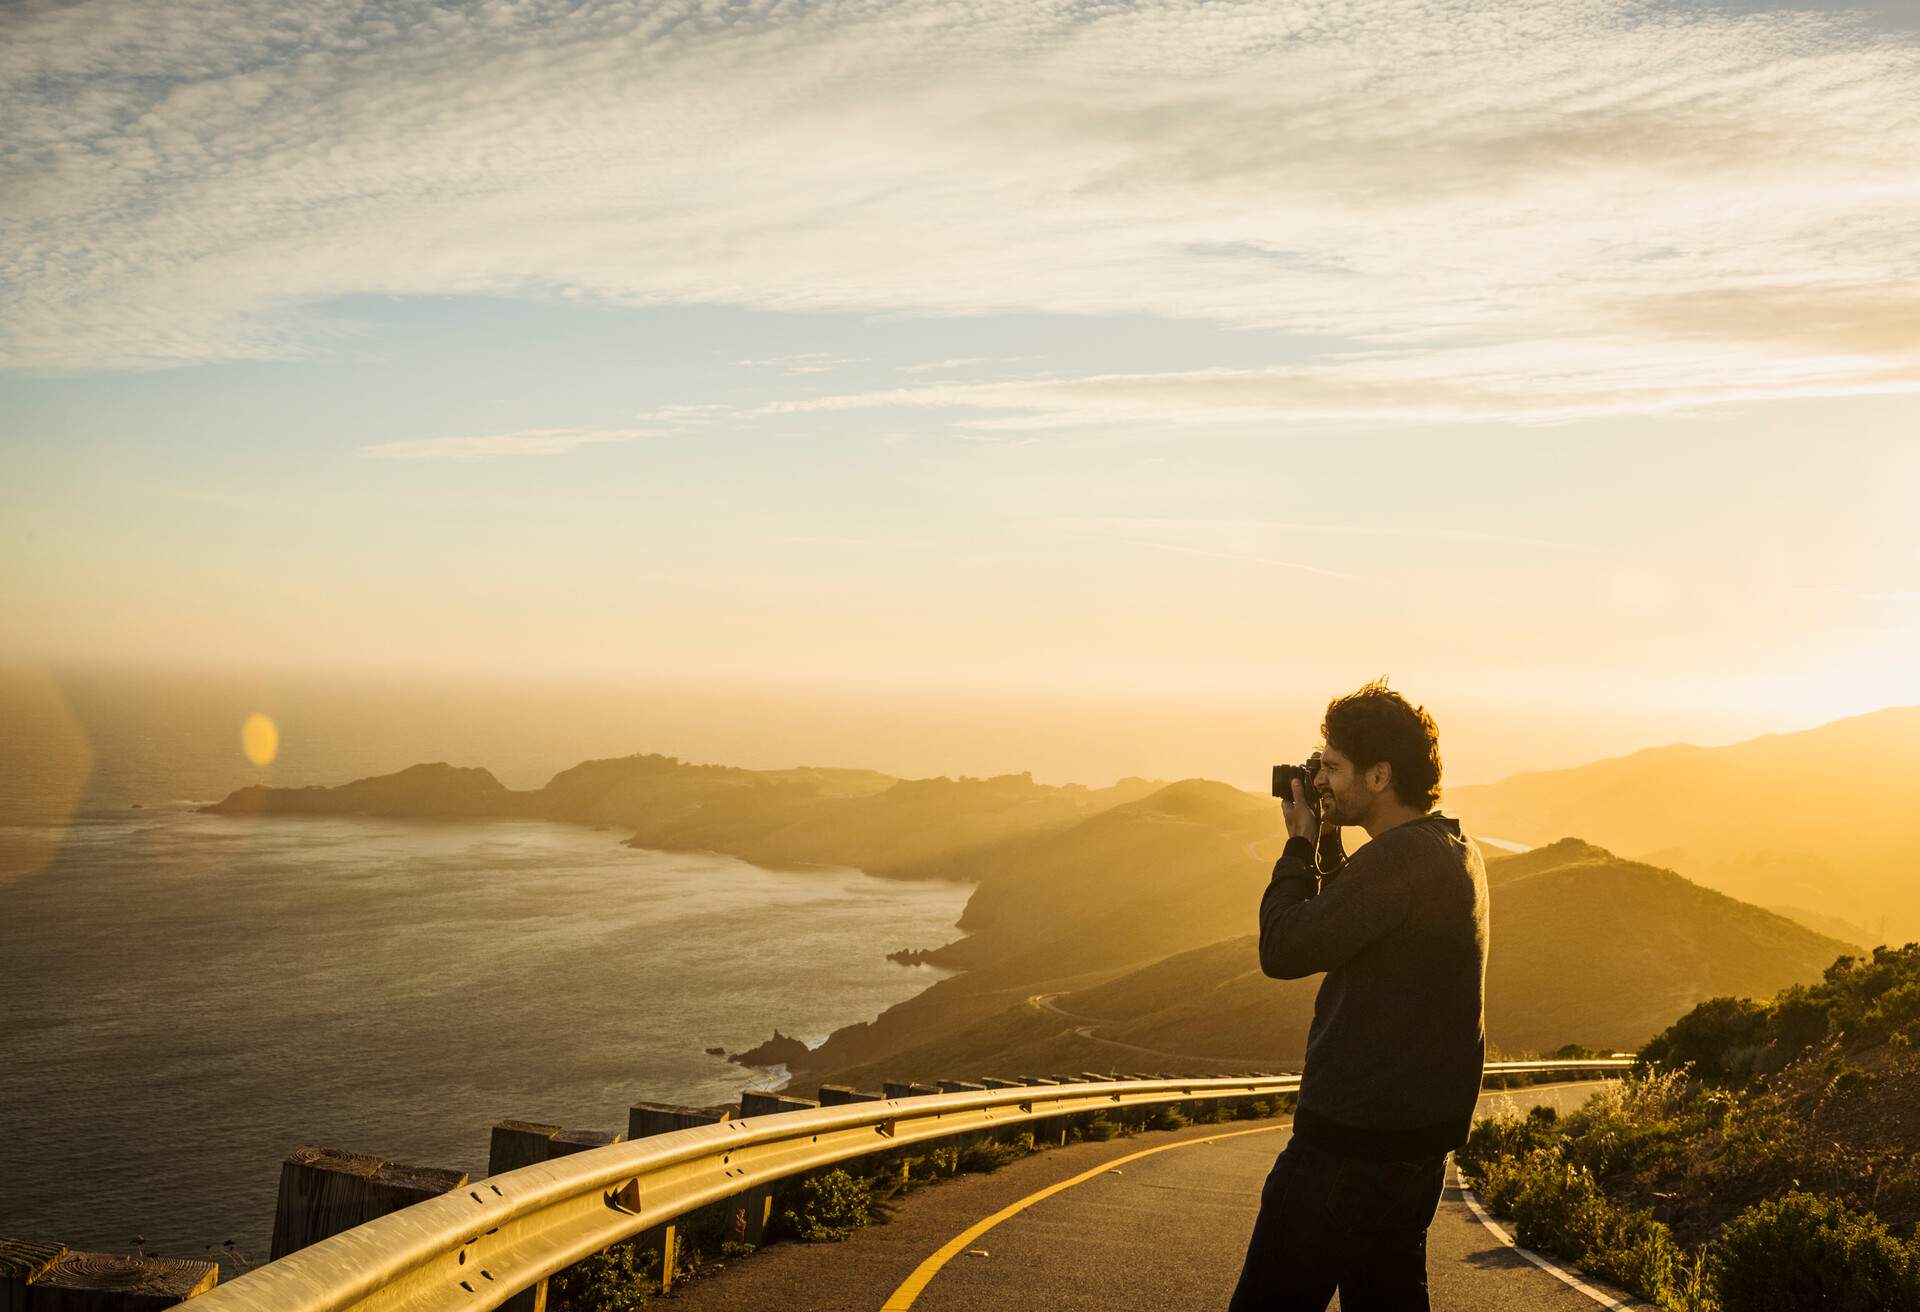 DEST_USA_CALIFORNIA_SAN_FRANCISCO_PEOPLE_MAN_TAKING_PICTURE_CAMERA_SEA_SUNSET_GettyImages-730138583